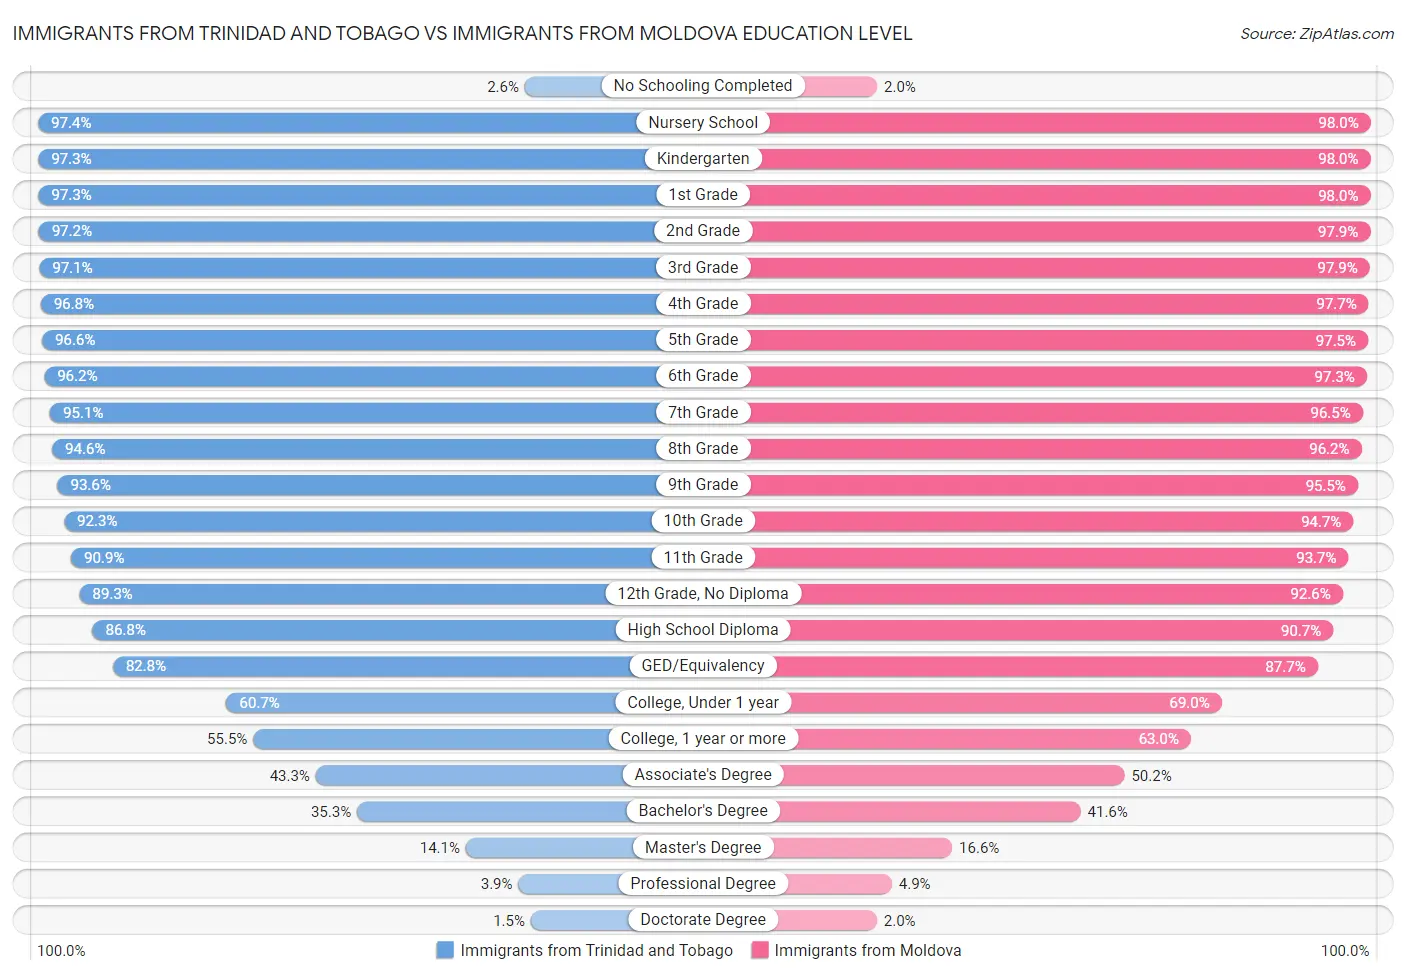 Immigrants from Trinidad and Tobago vs Immigrants from Moldova Education Level